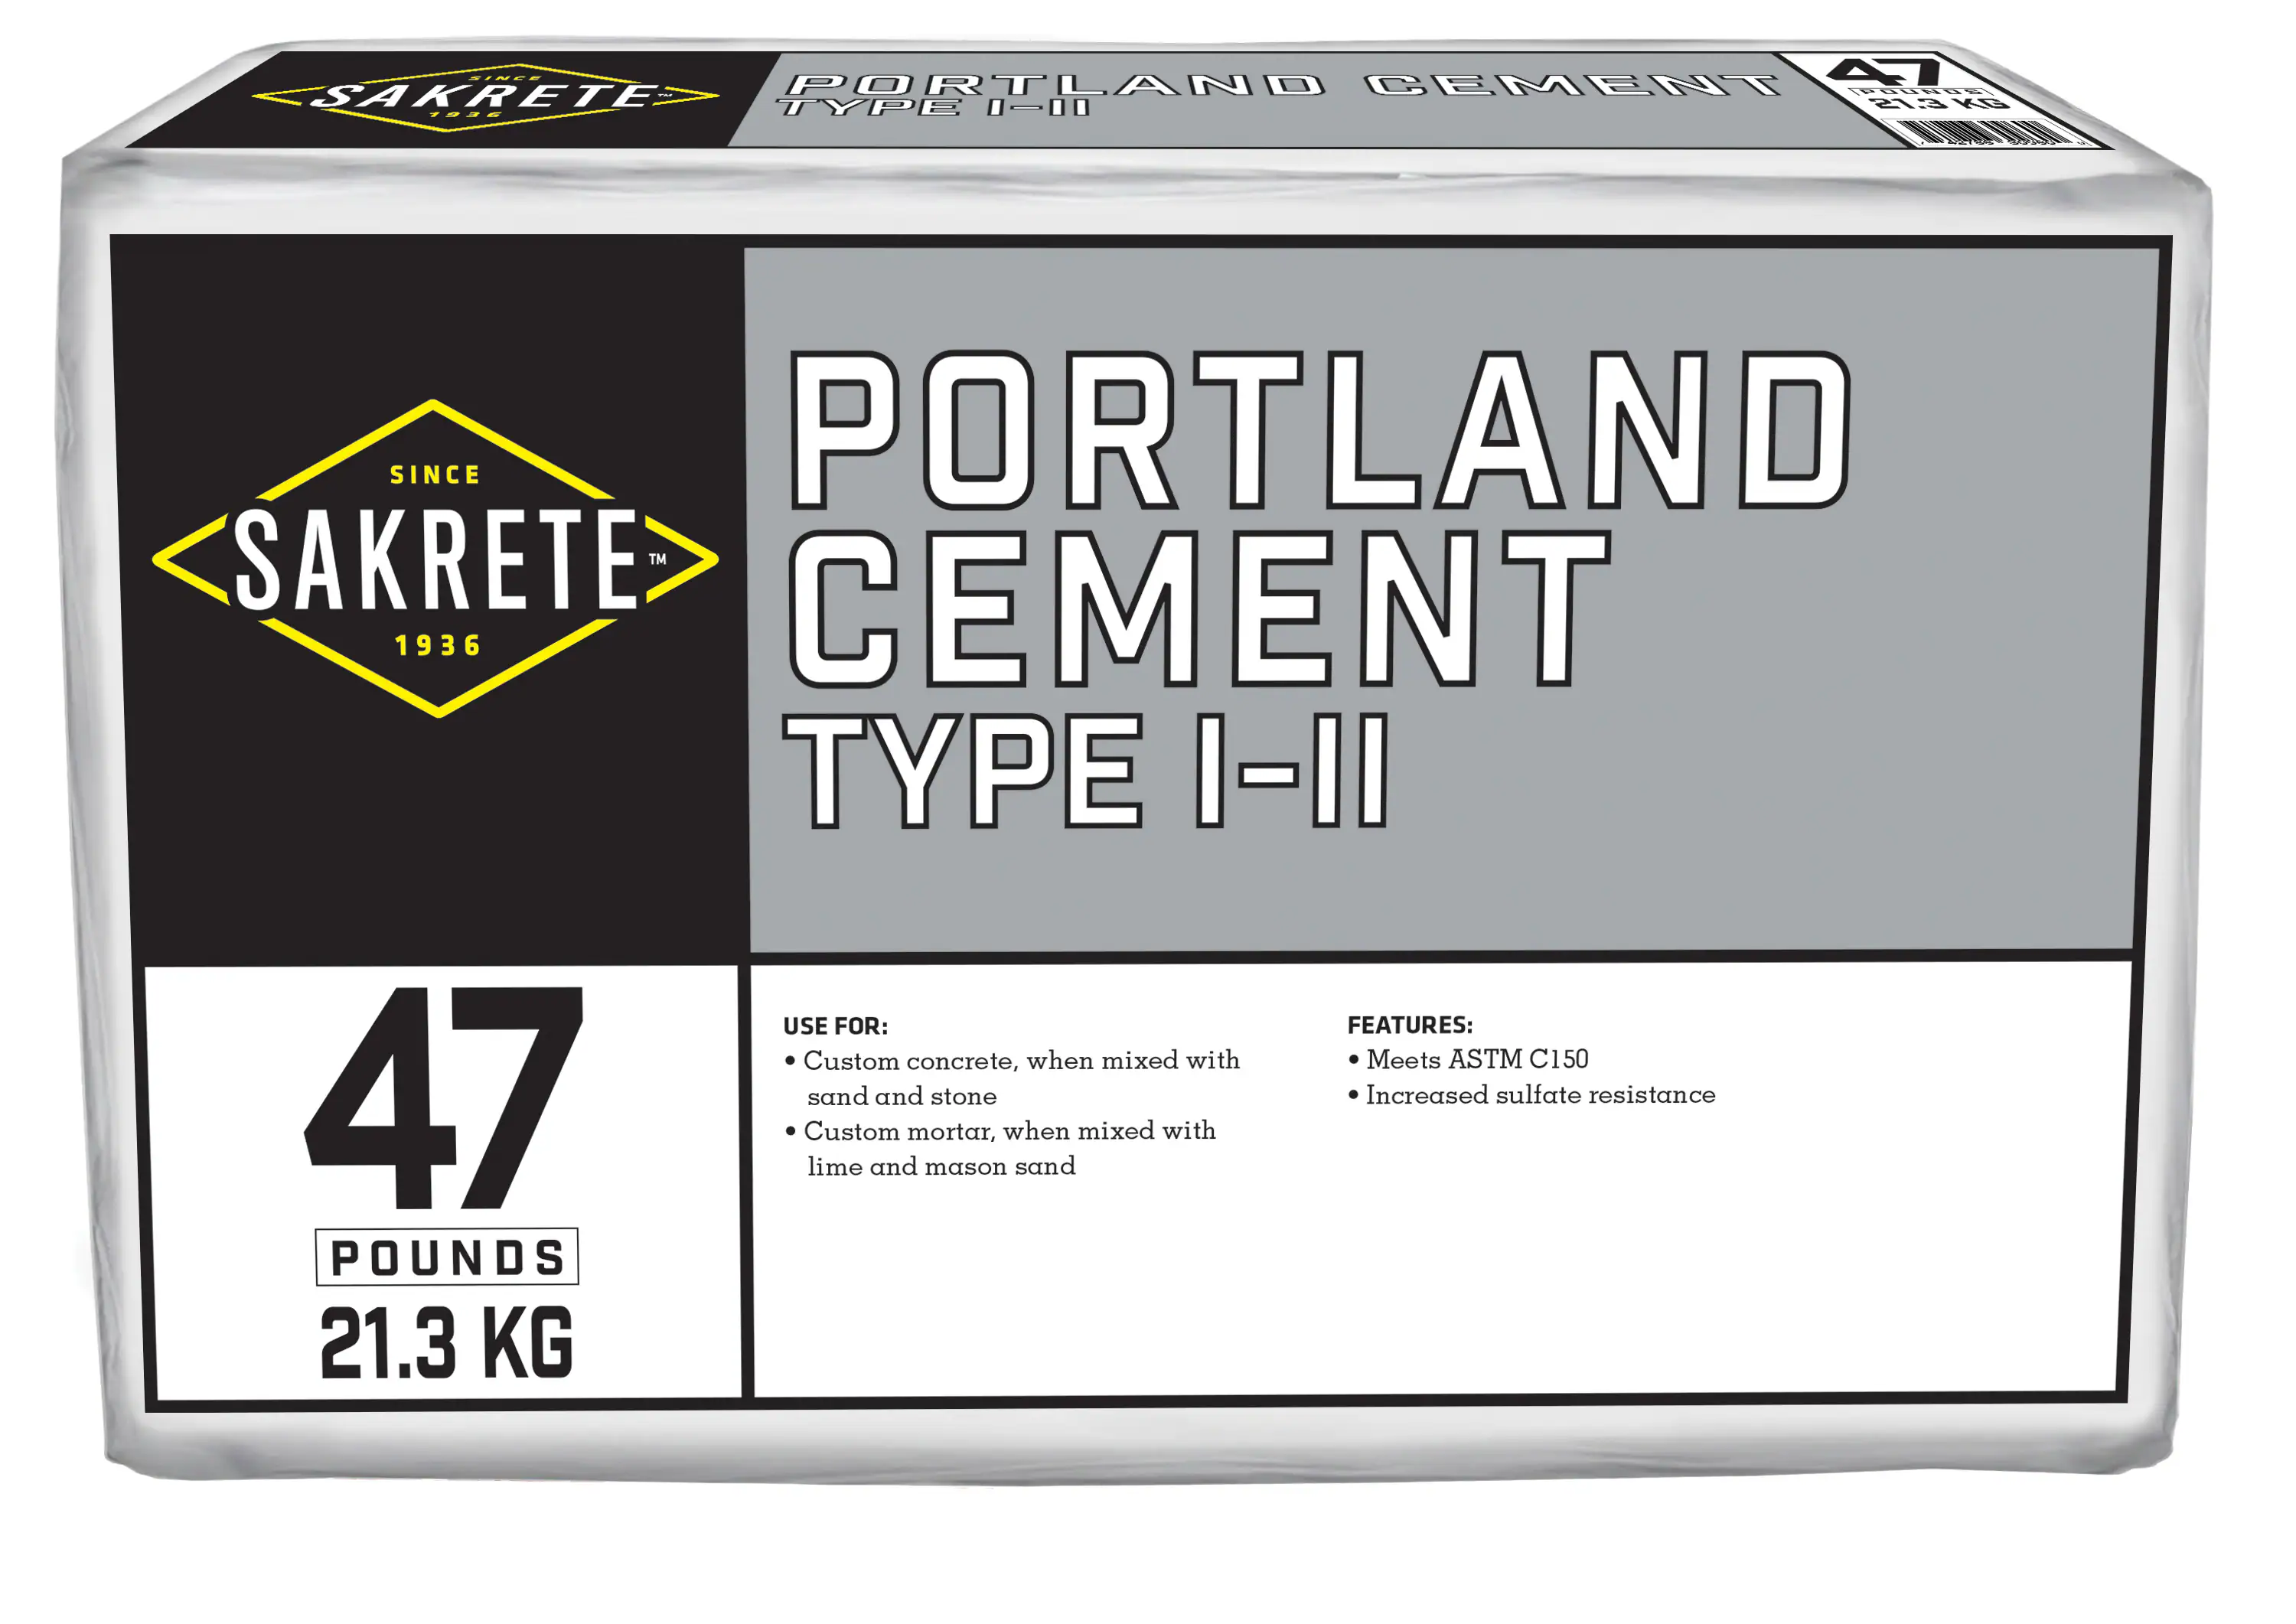 An image showcasing the use of Portland cement in Type II: Moderate Sulfate Resistance concrete mix design.